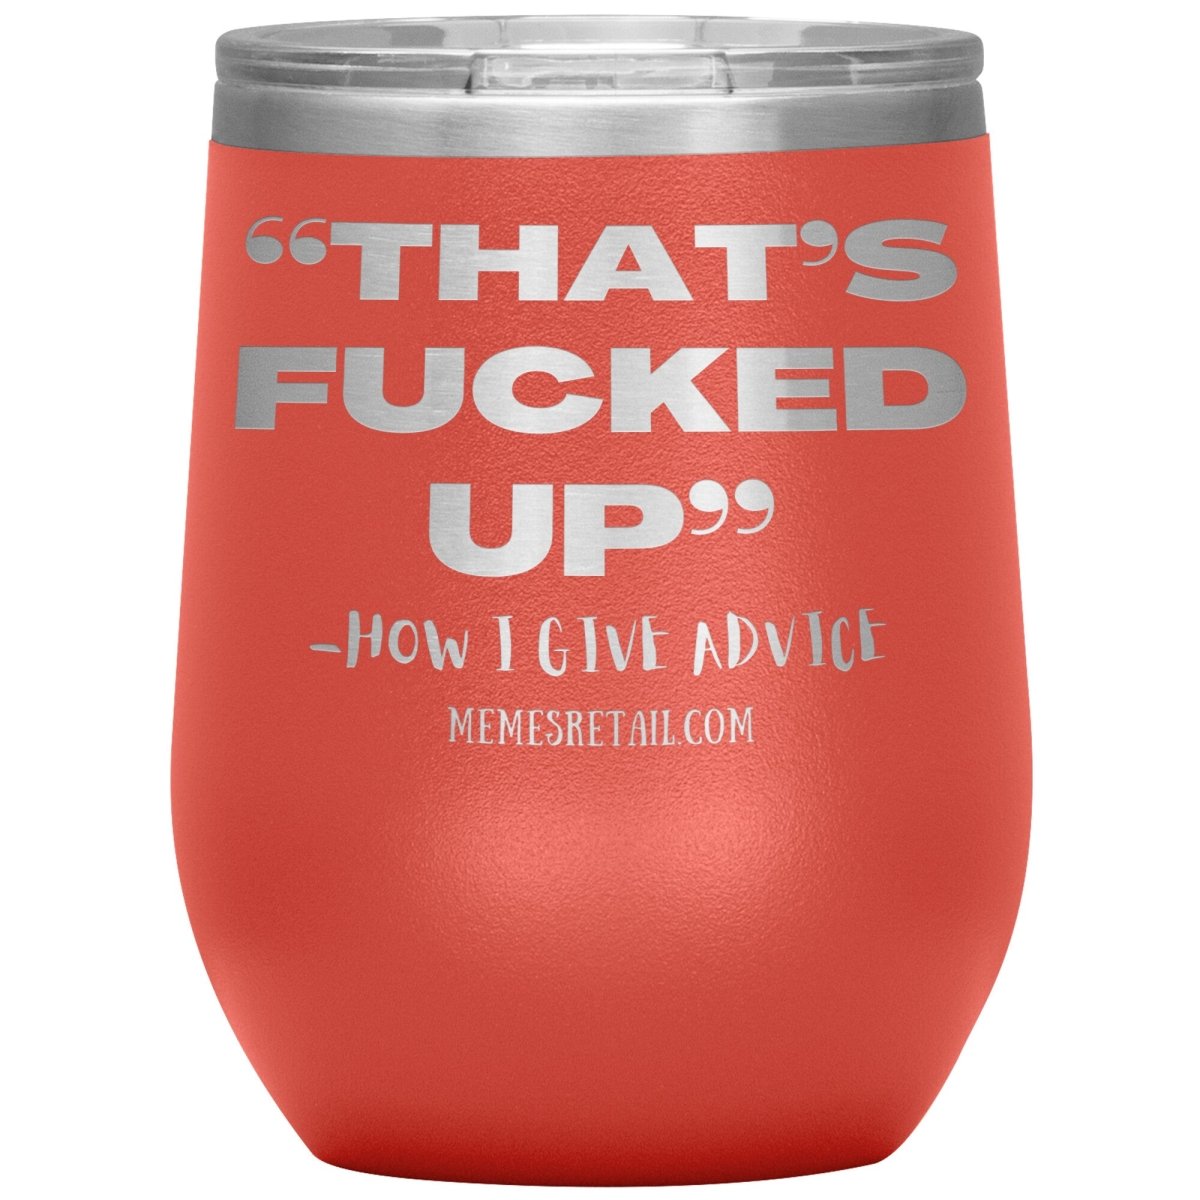 “That’s Fucked Up” -how I give advice Tumblers, 12oz Wine Insulated Tumbler / Coral - MemesRetail.com